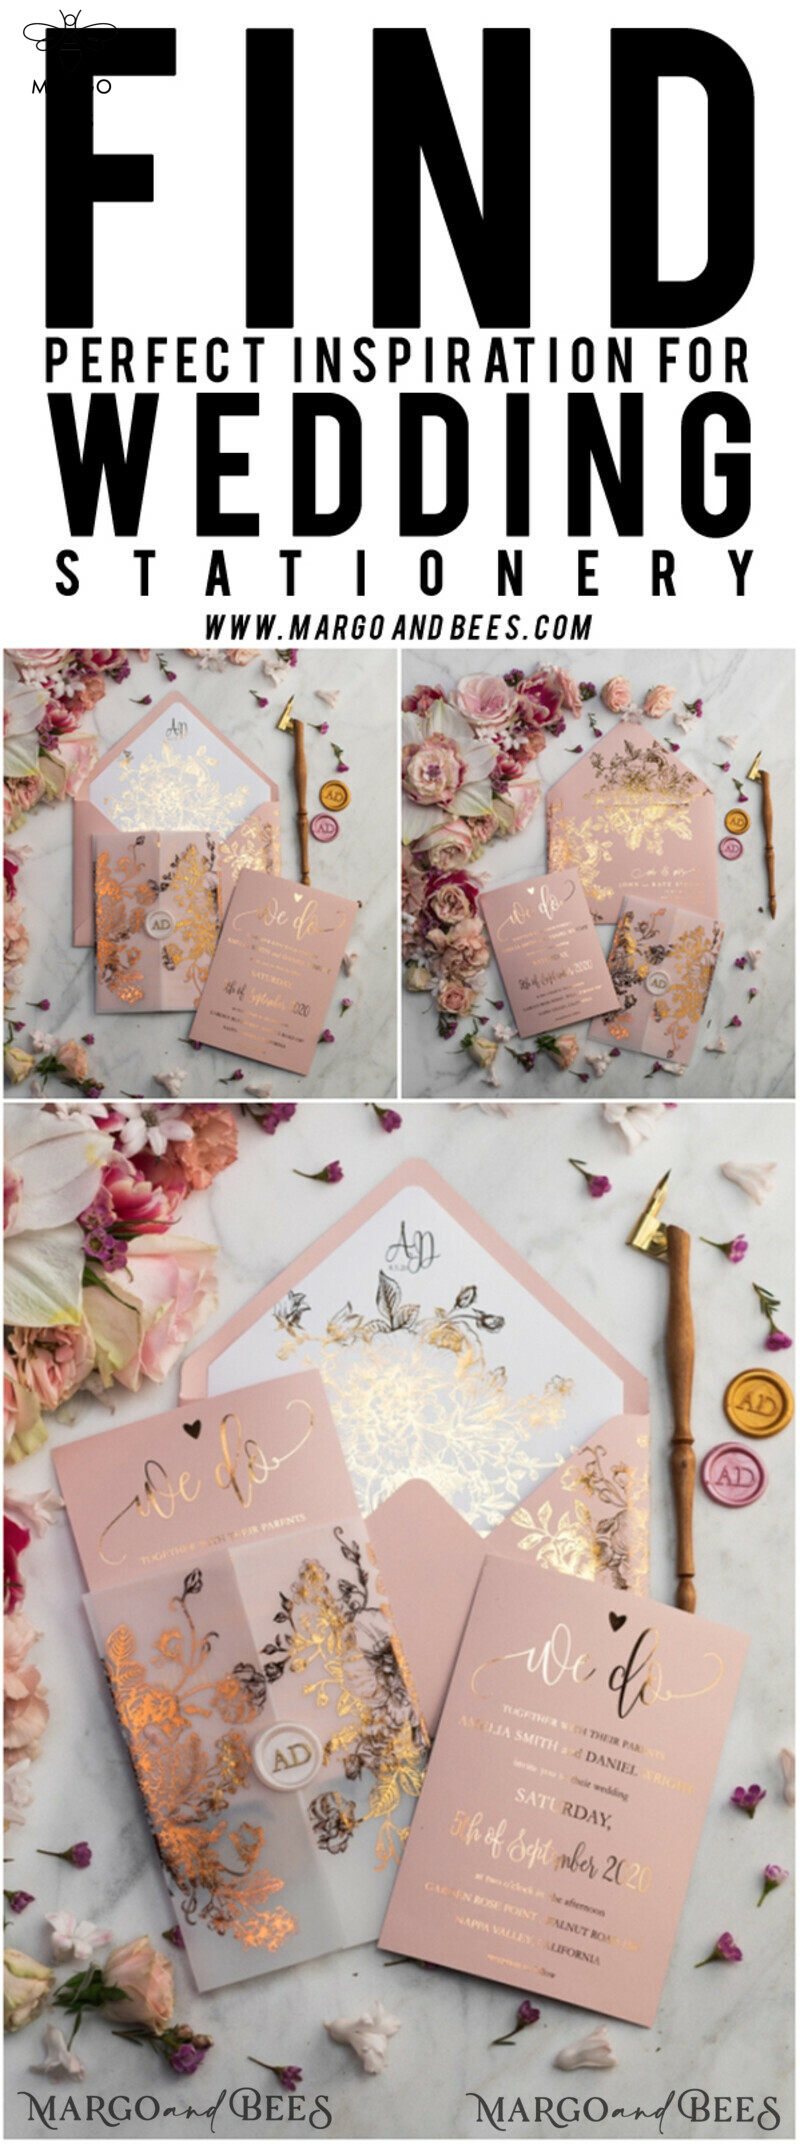 Luxury Vellum Gold Foil Wedding Invitations: An Elegant Blush Pink Invitation Suite with Glamour and Golden Shine-65